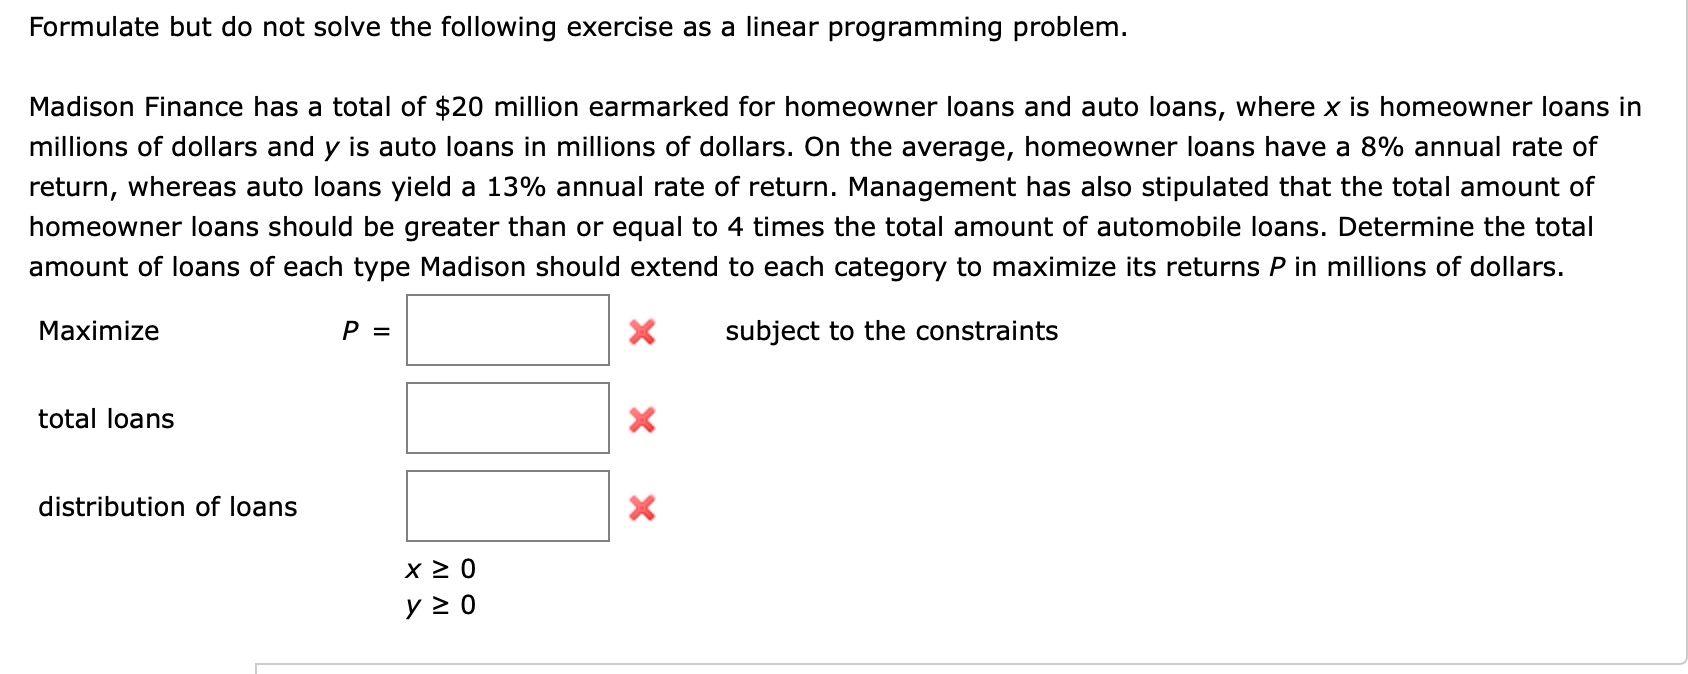 Formulate but do not solve the following exercise as a linear programming problem.
Madison Finance has a total of $20 million earmarked for homeowner loans and auto loans, where x is homeowner loans in
millions of dollars and y is auto loans in millions of dollars. On the average, homeowner loans have a 8% annual rate of
return, whereas auto loans yield a 13% annual rate of return. Management has also stipulated that the total amount of
homeowner loans should be greater than or equal to 4 times the total amount of automobile loans. Determine the total
amount of loans of each type Madison should extend to each category to maximize its returns P in millions of dollars.
subject to the constraints
Maximize
P
X
total loans
X
distribution of loans
y 0
